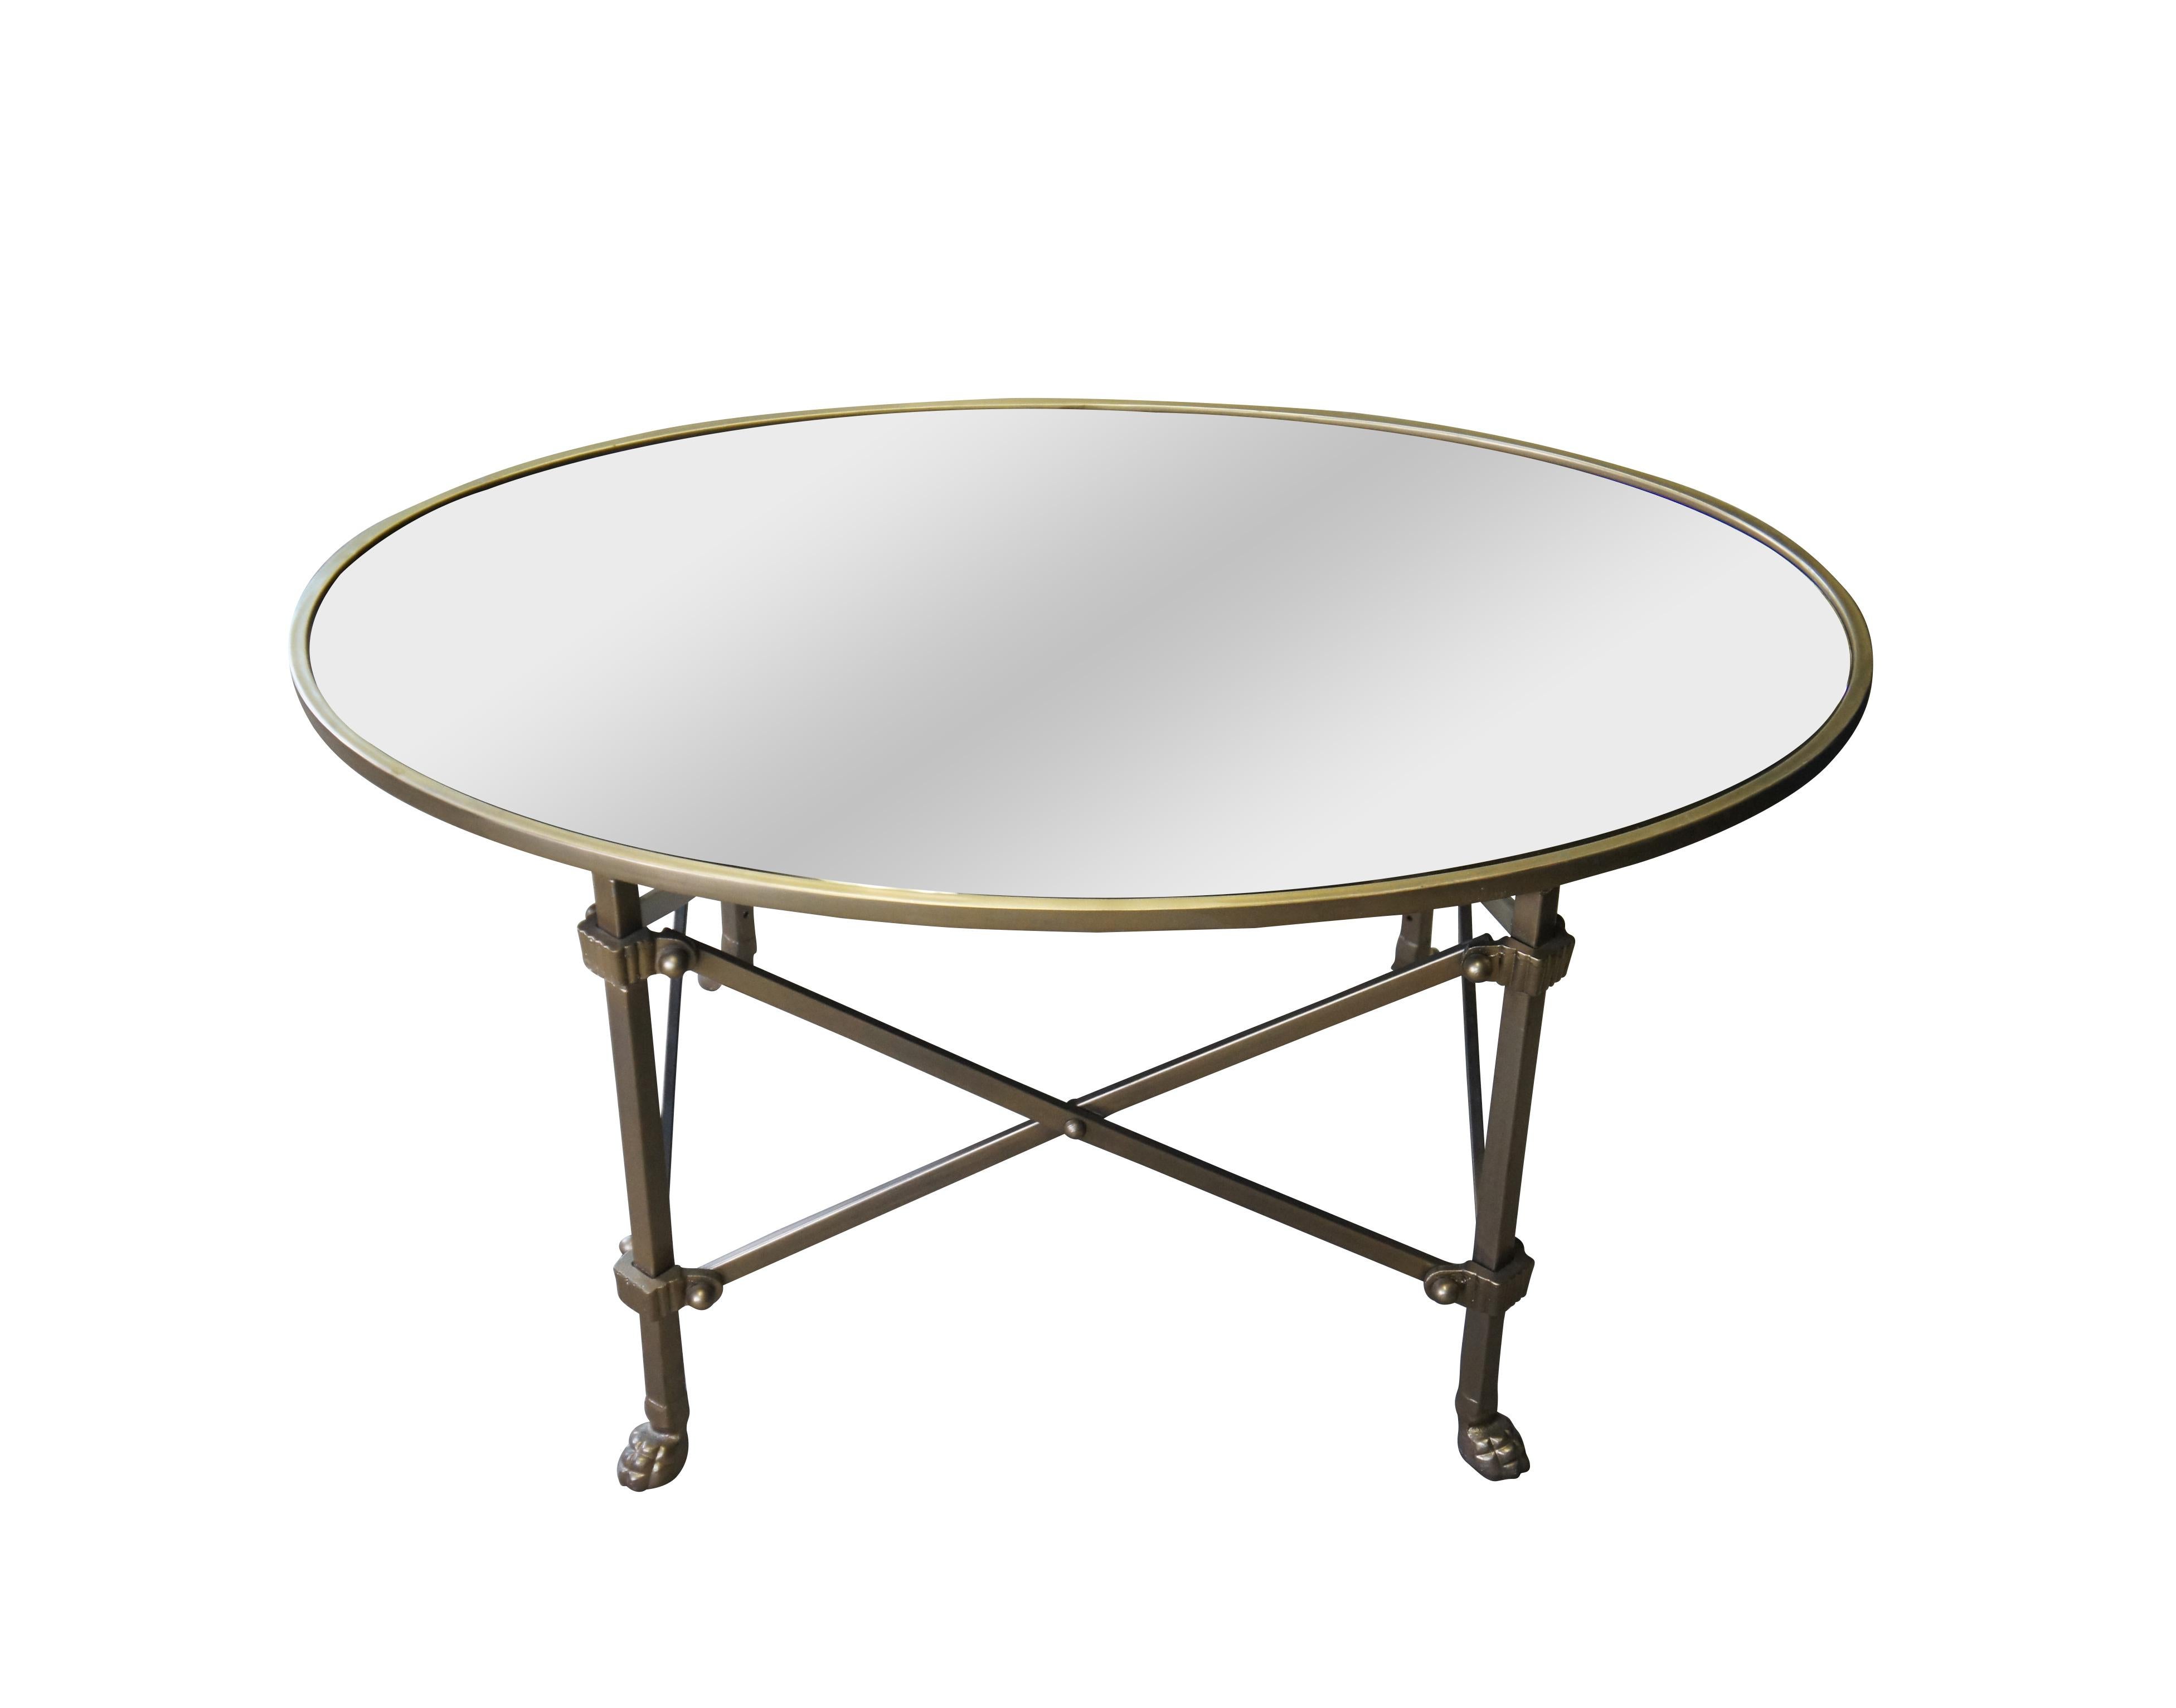 Vintage Ballard Designs Olivia cocktail table. A stylish update on the classic French gueridon, this oval coffee table is crafted of metal with classic claw-footed legs, 